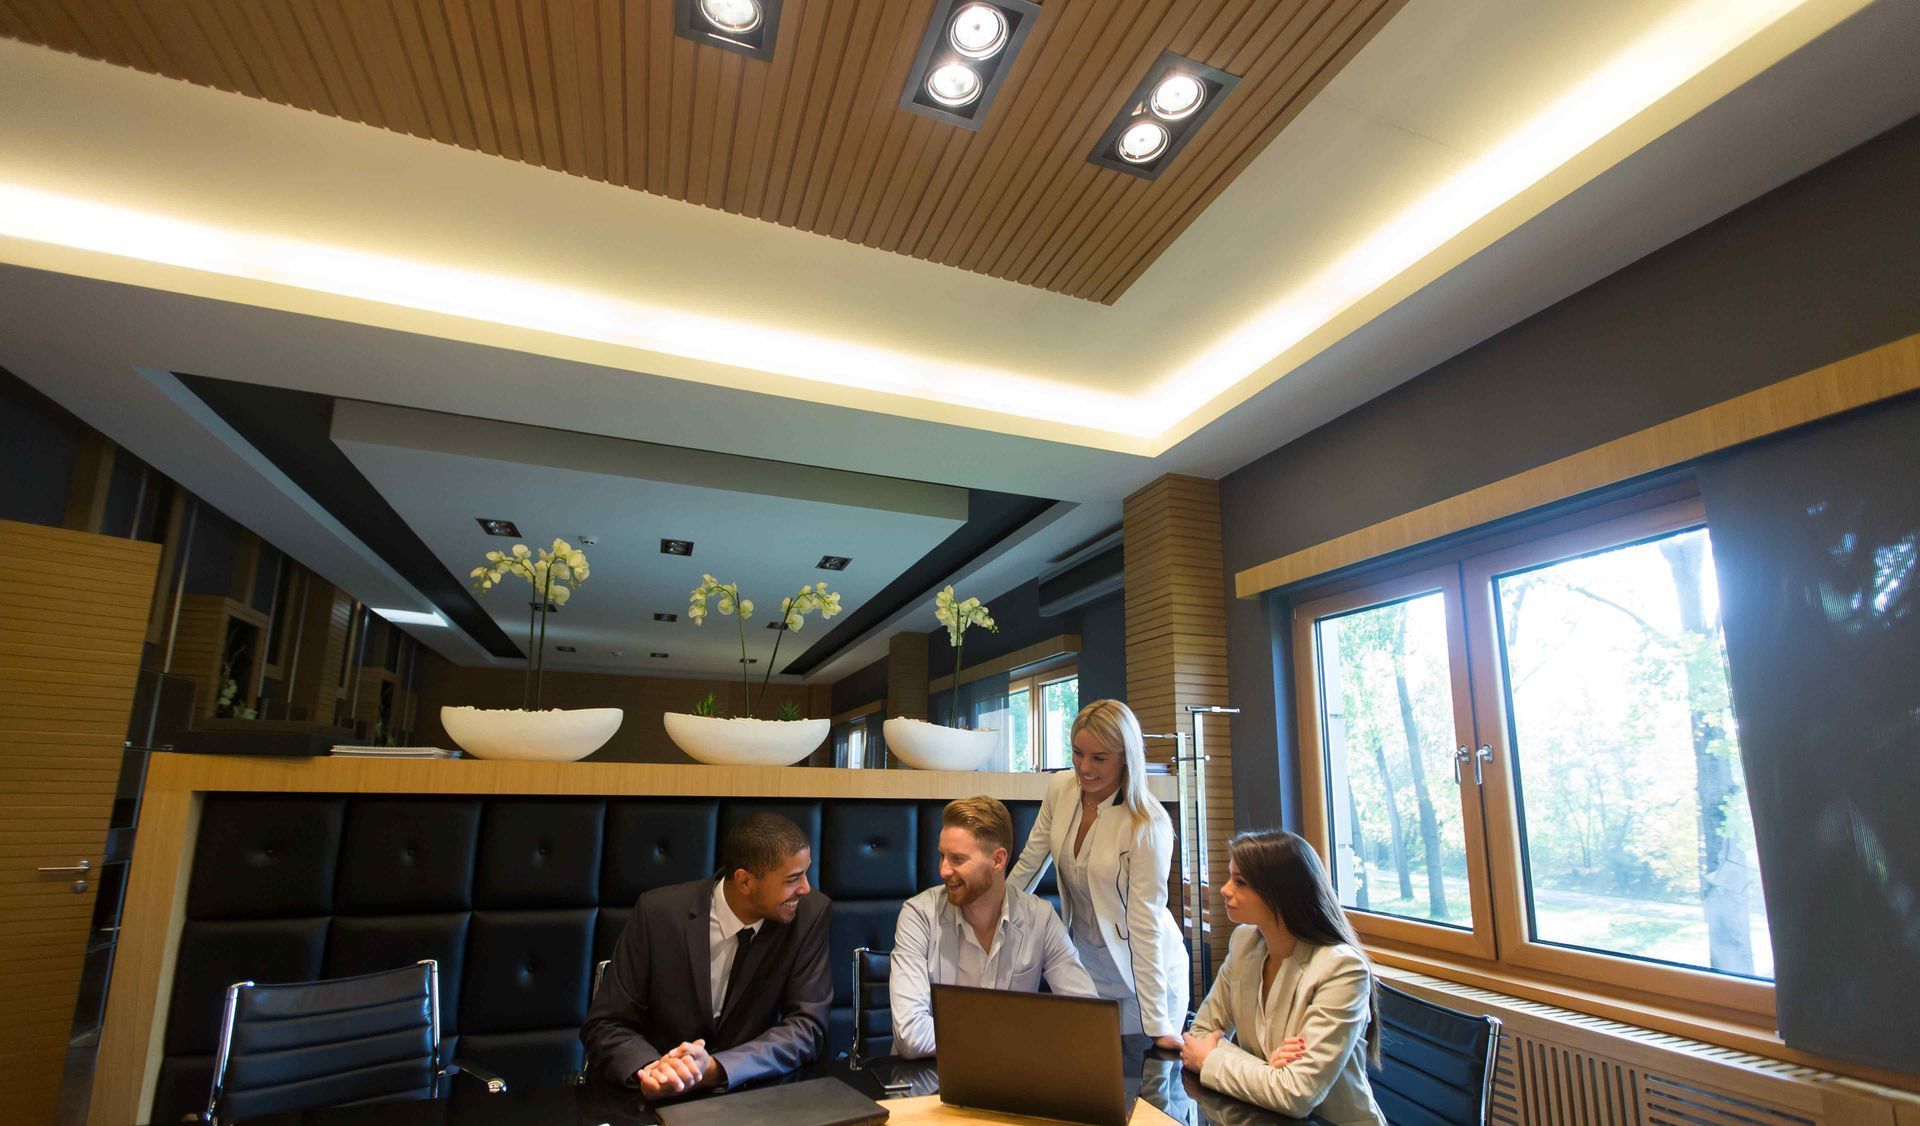 Group of Business People In Meeting Room With Good Lighting